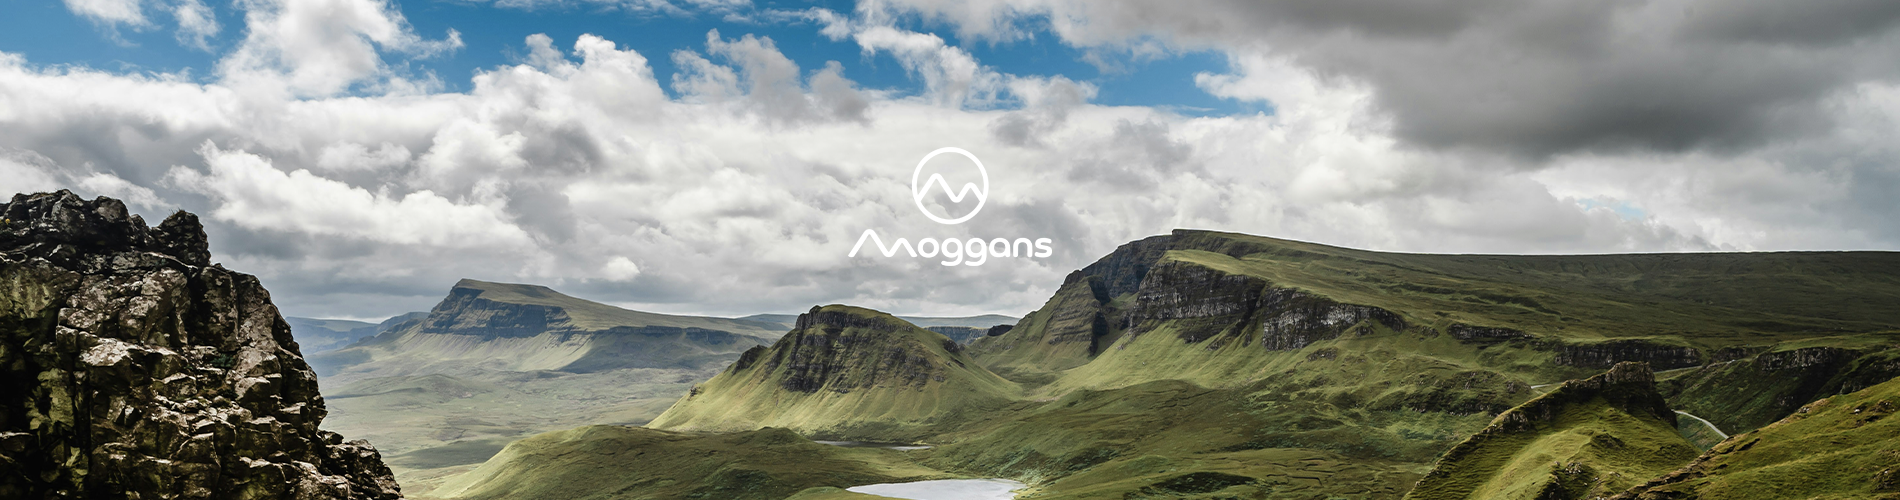 Who are Moggans?